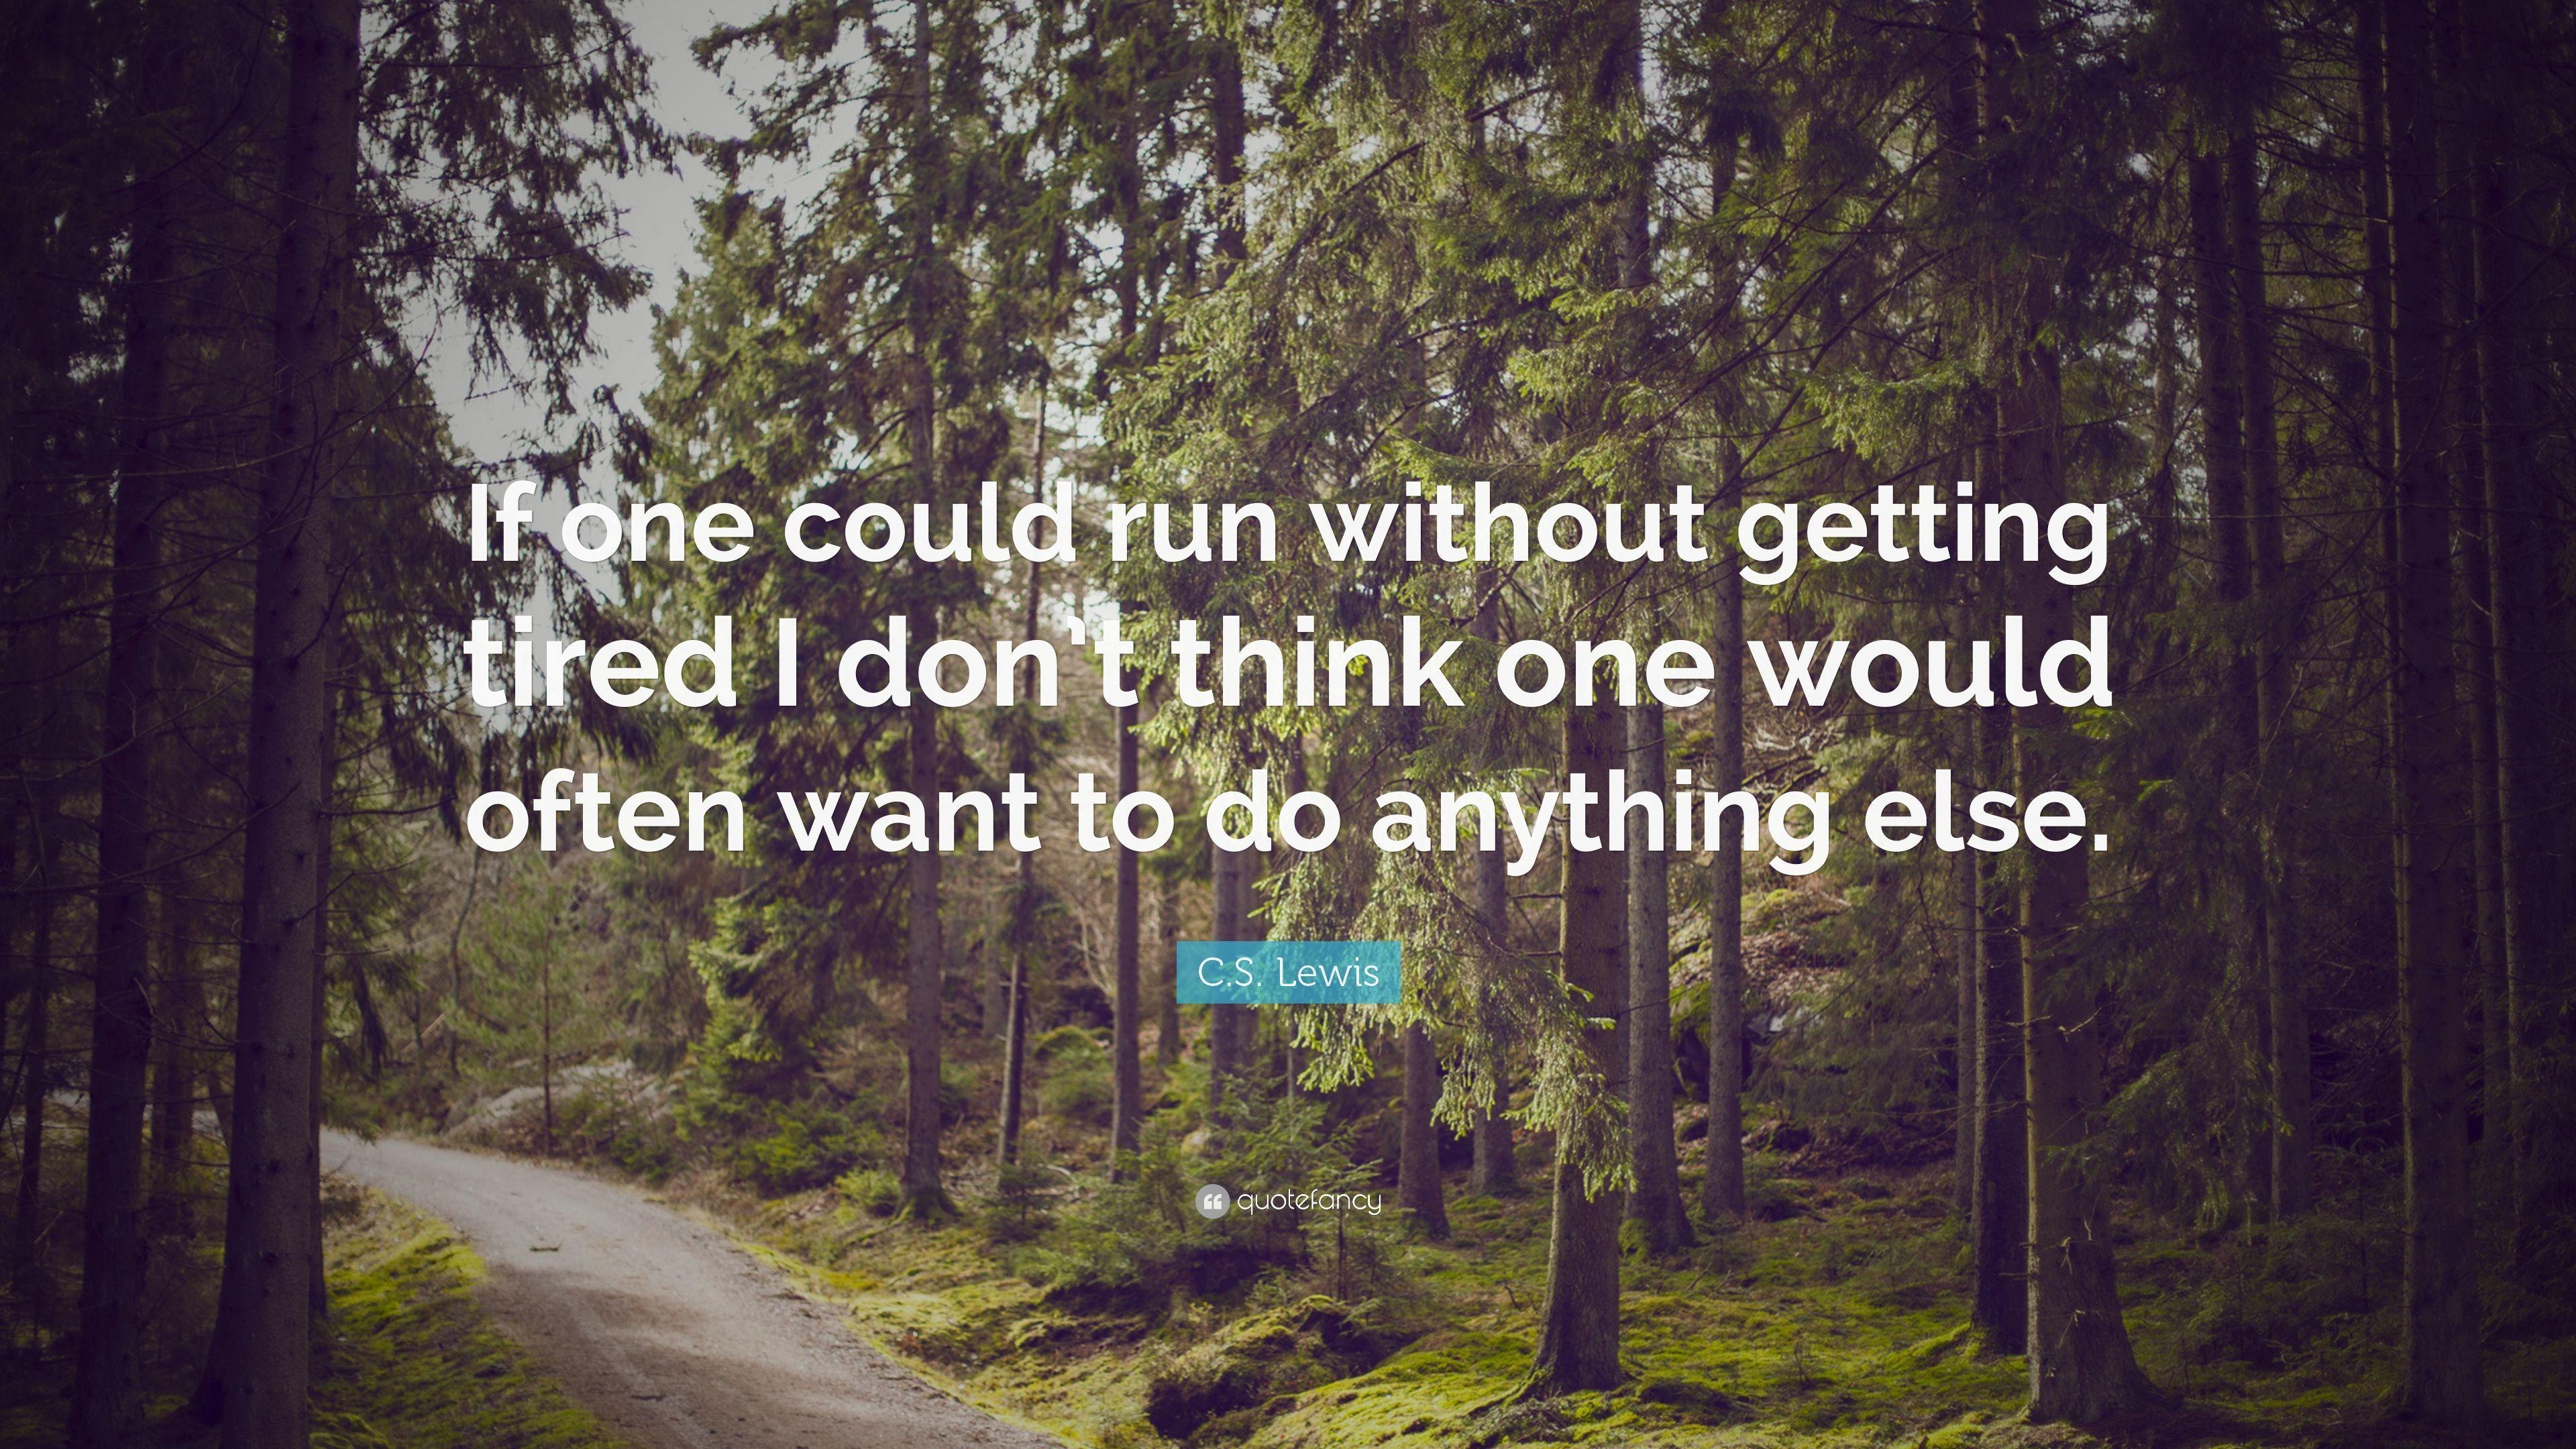 C. S. Lewis Quote: “If one could run without getting tired I don't